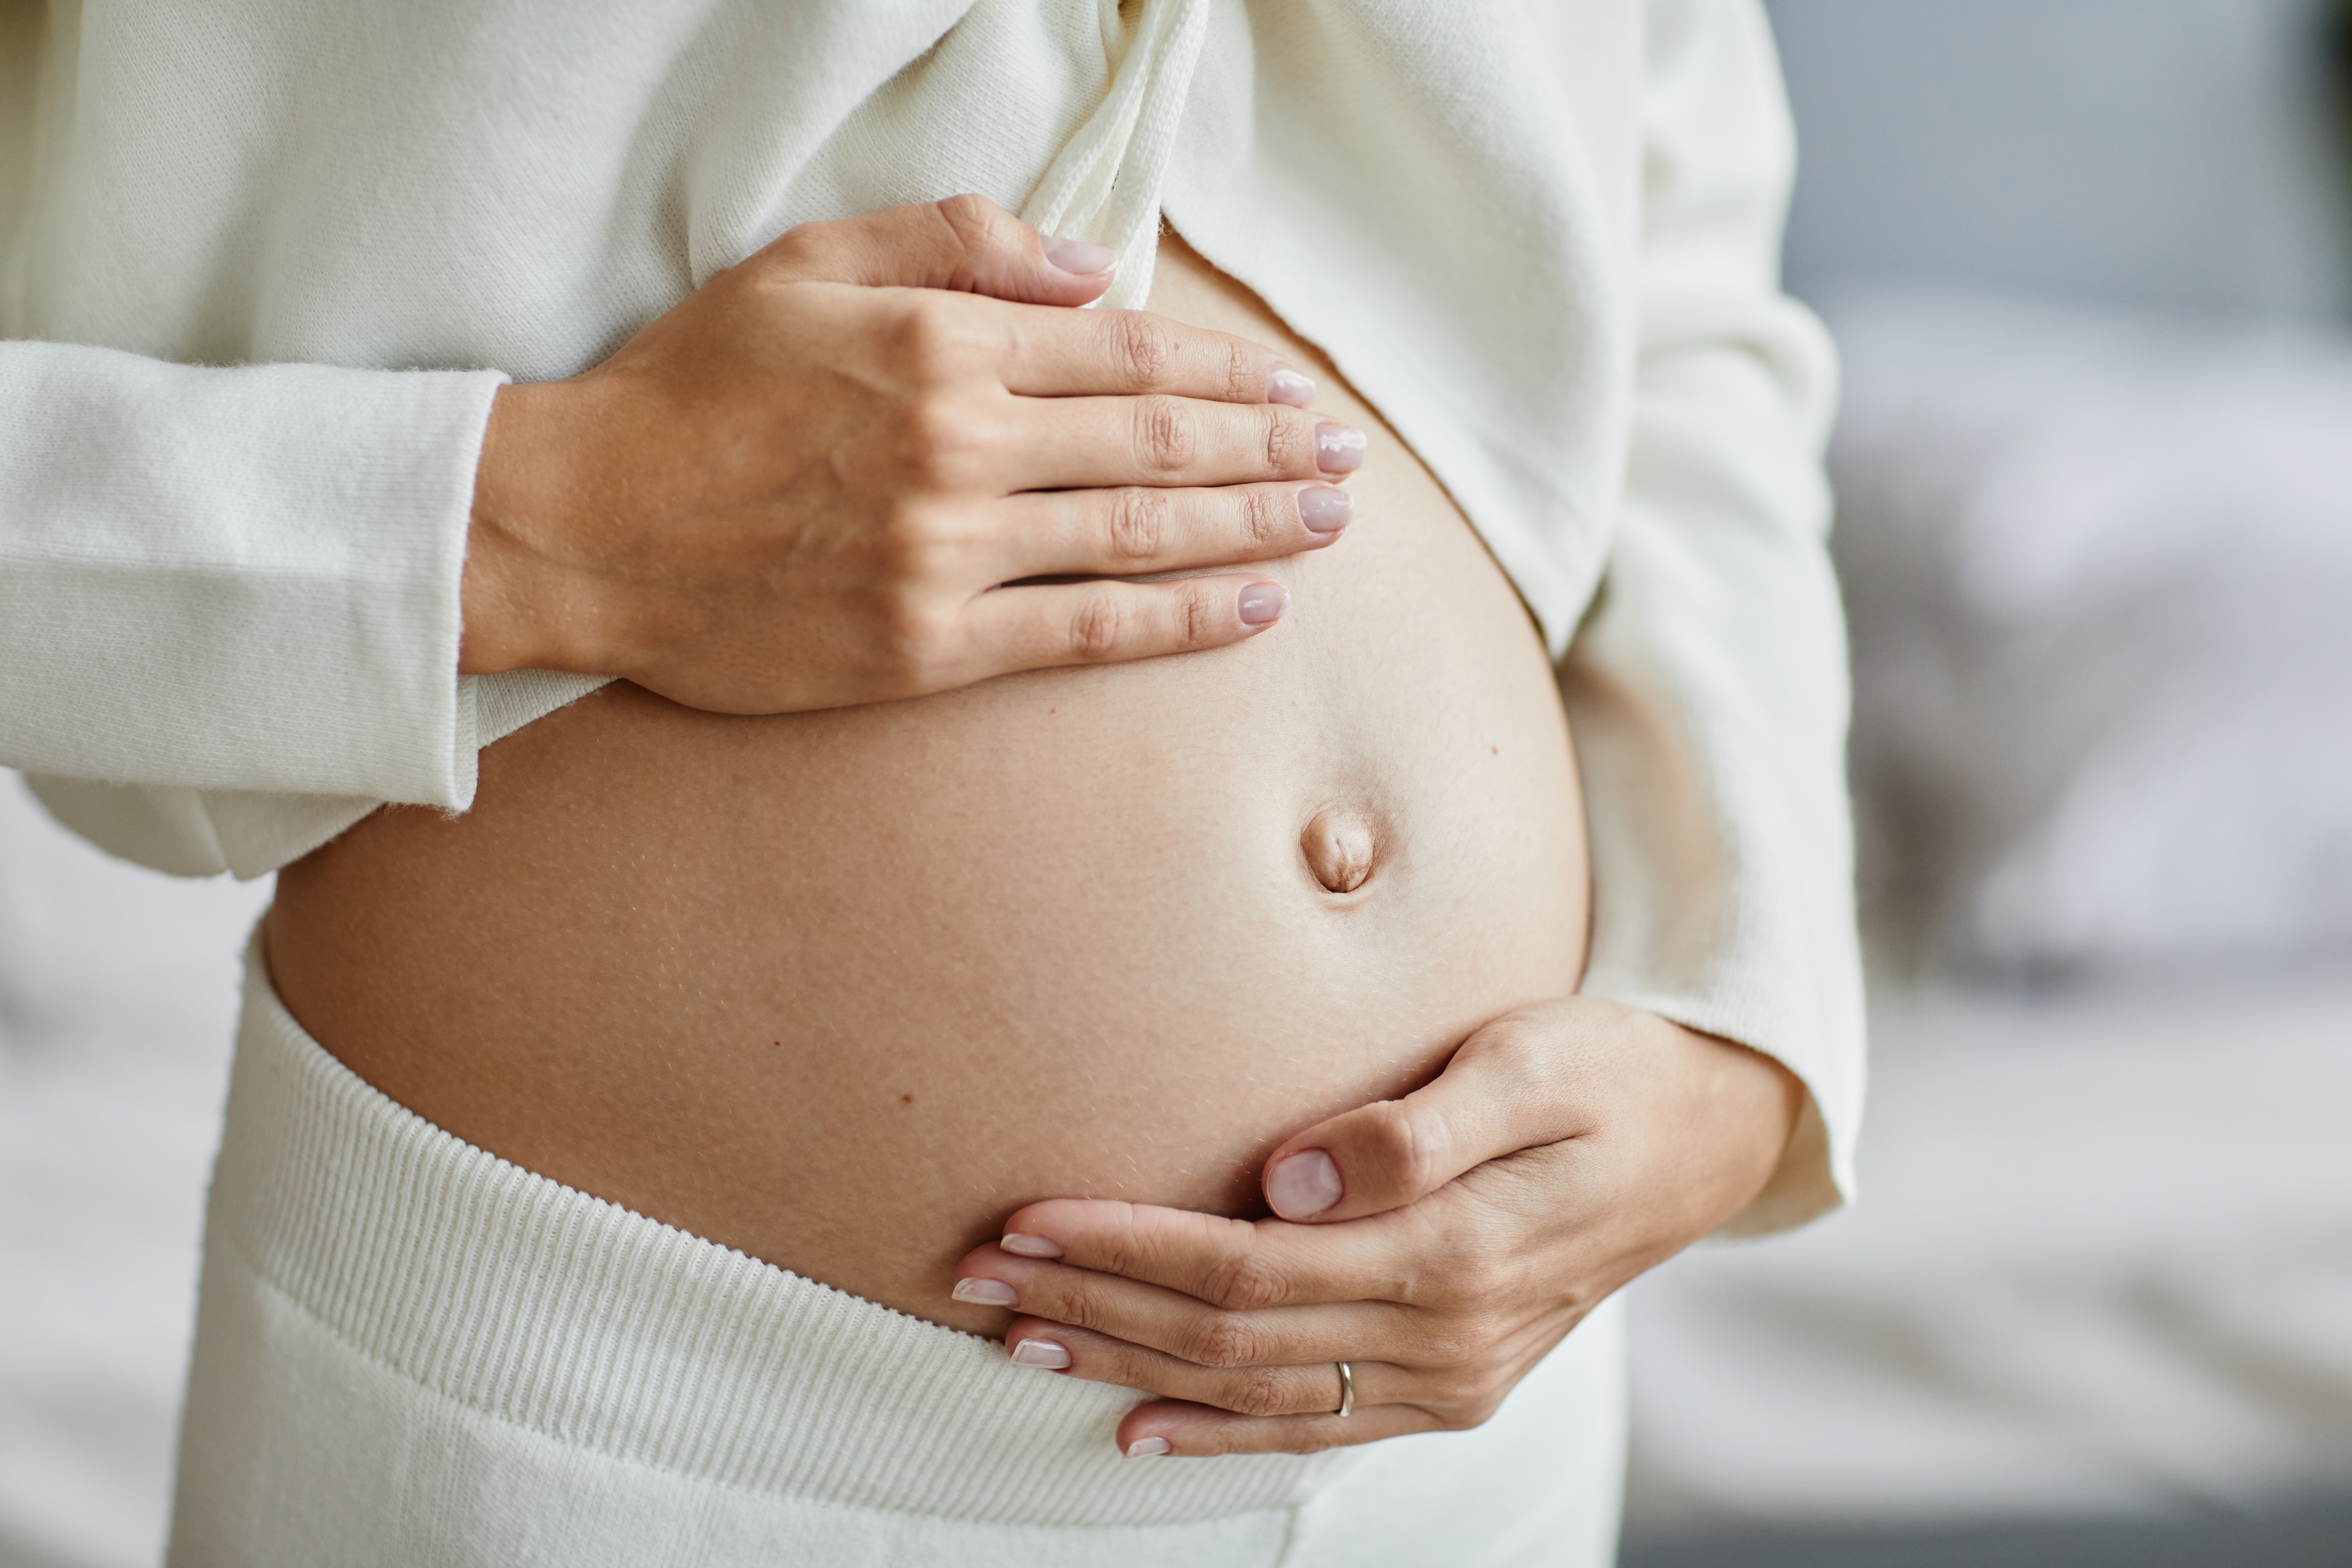 A pregnant woman cradling her belly | Source: Shutterstock